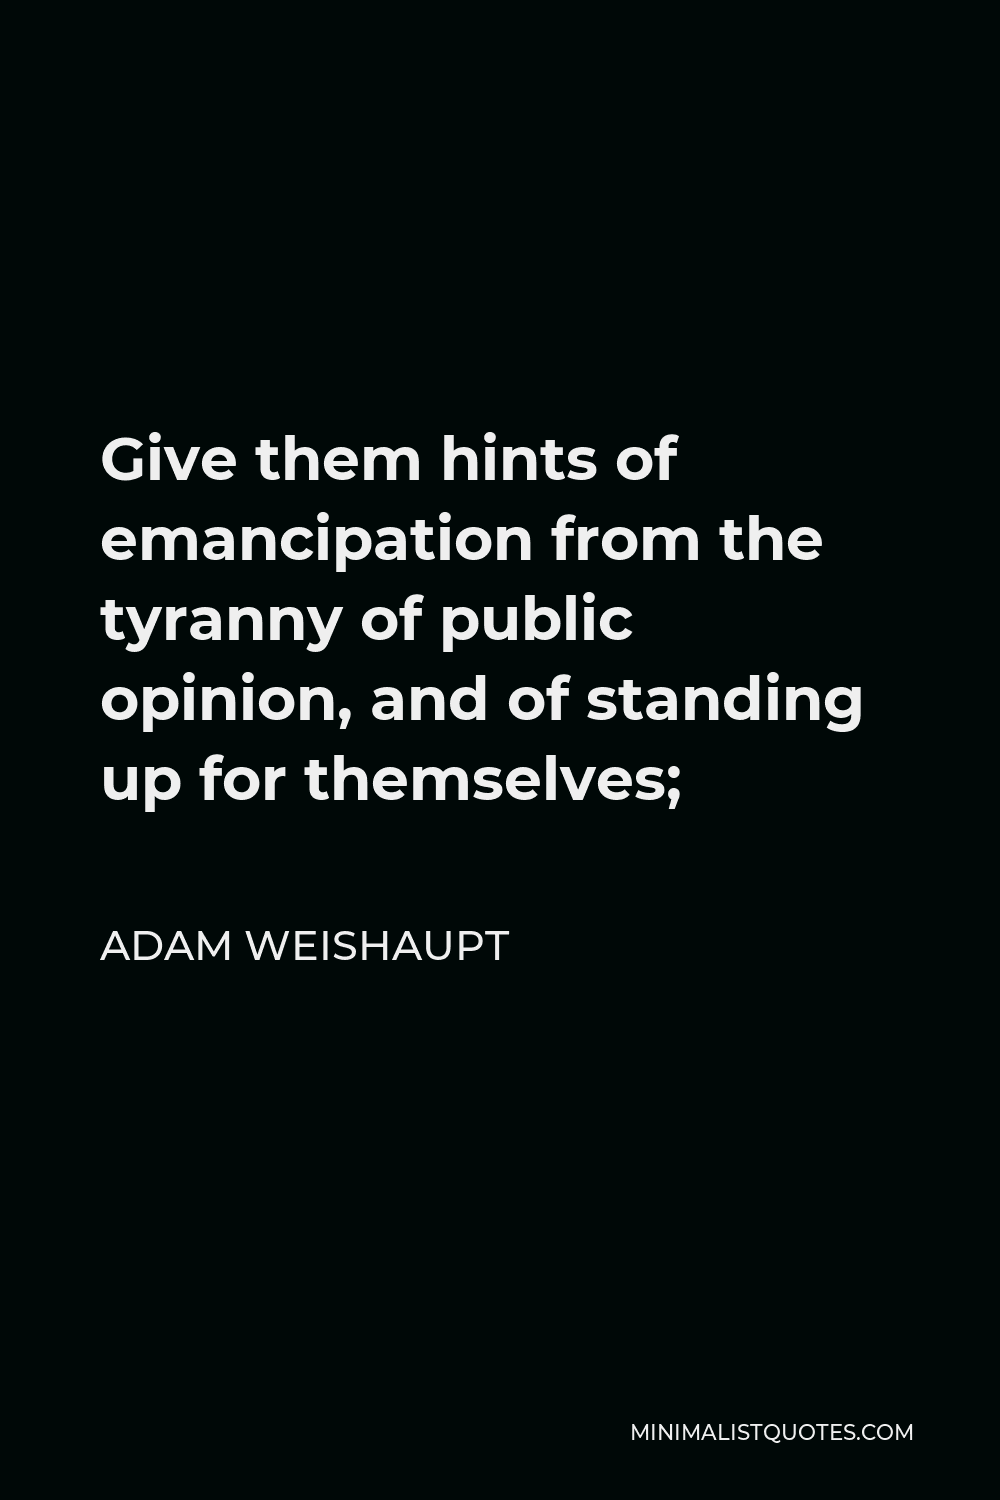 Adam Weishaupt Quote - Give them hints of emancipation from the tyranny of public opinion, and of standing up for themselves;